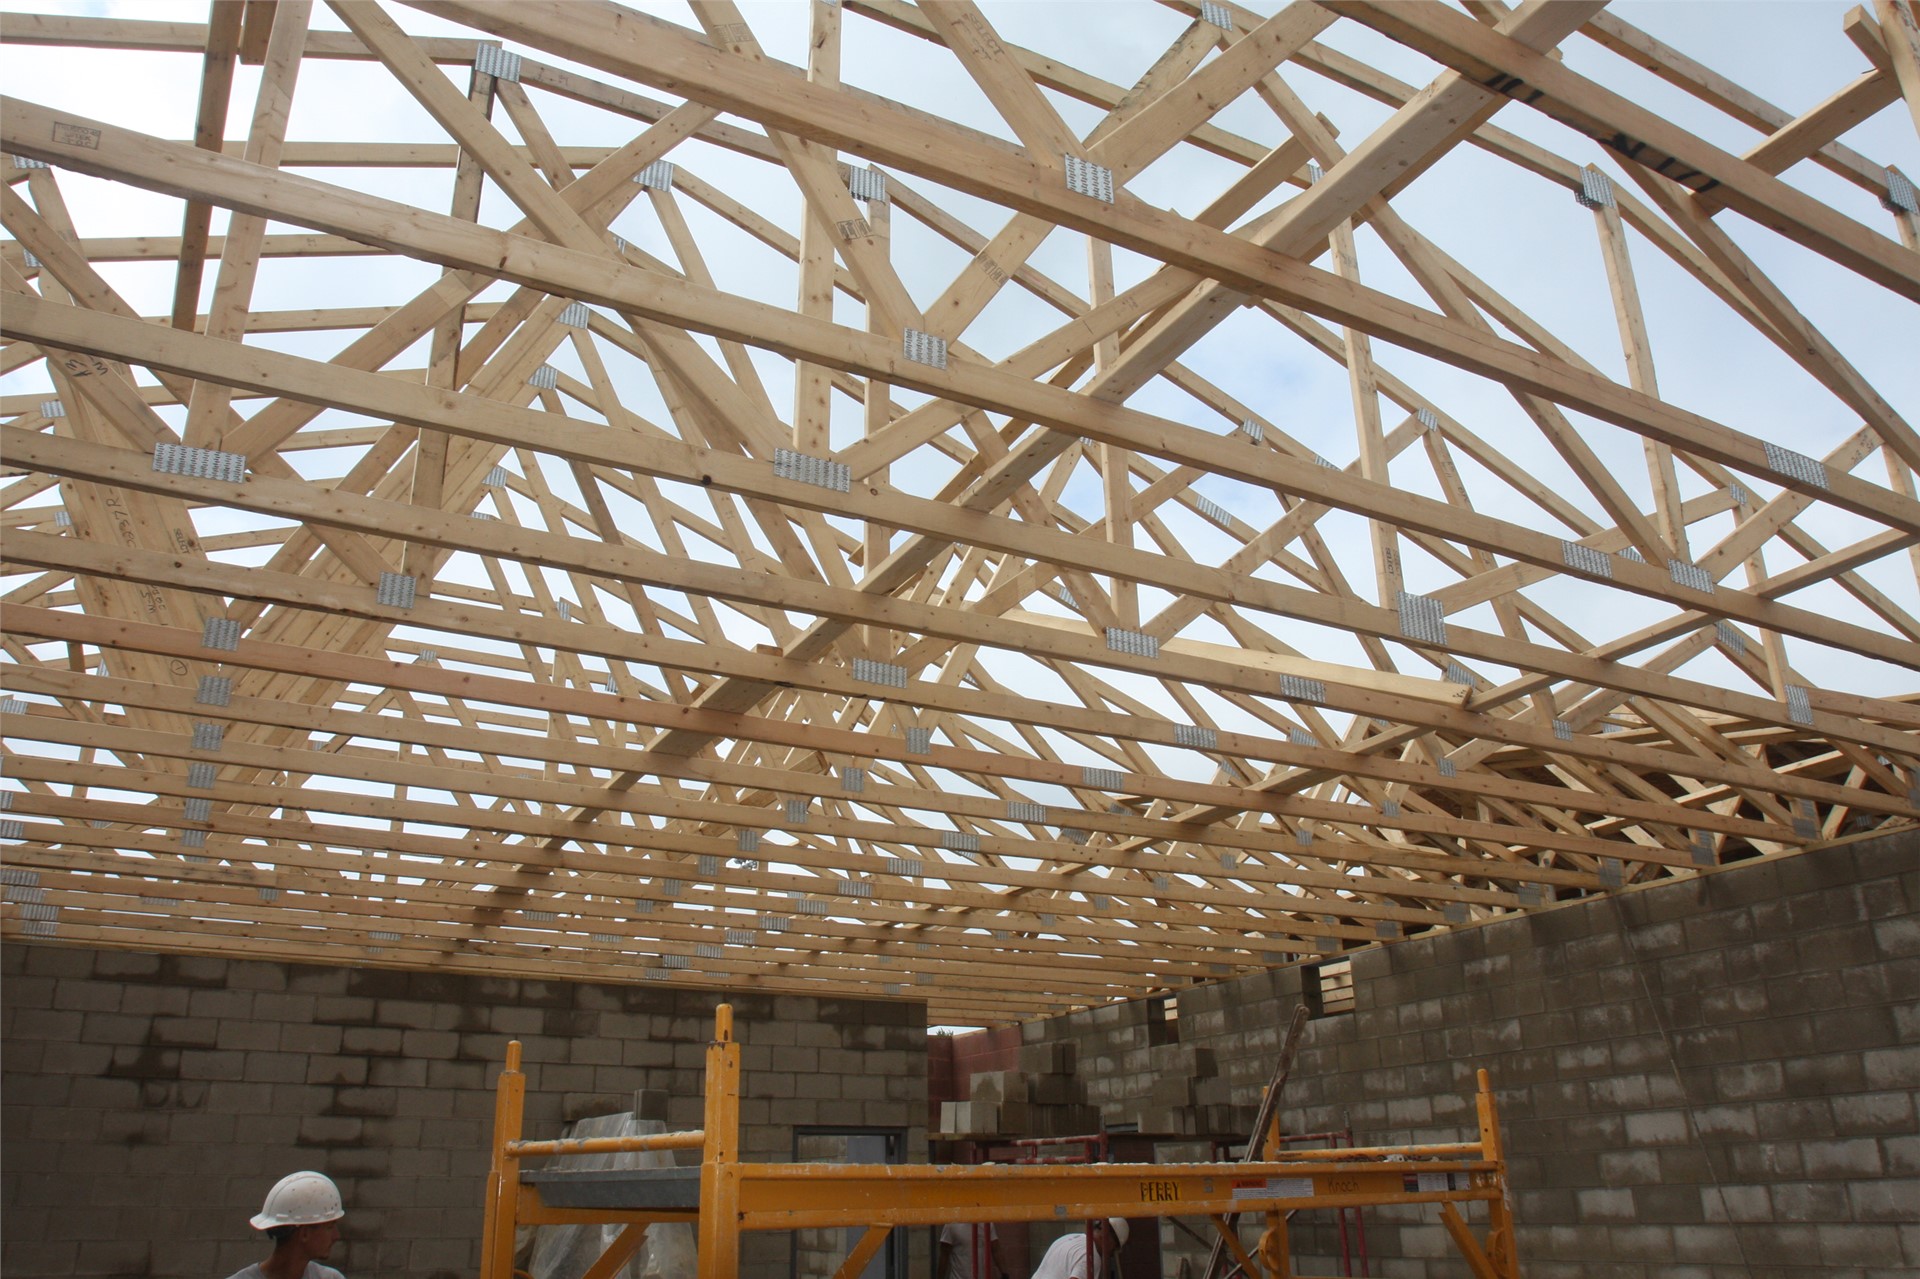 Trusses for roofing are in and ready for sheet and felt